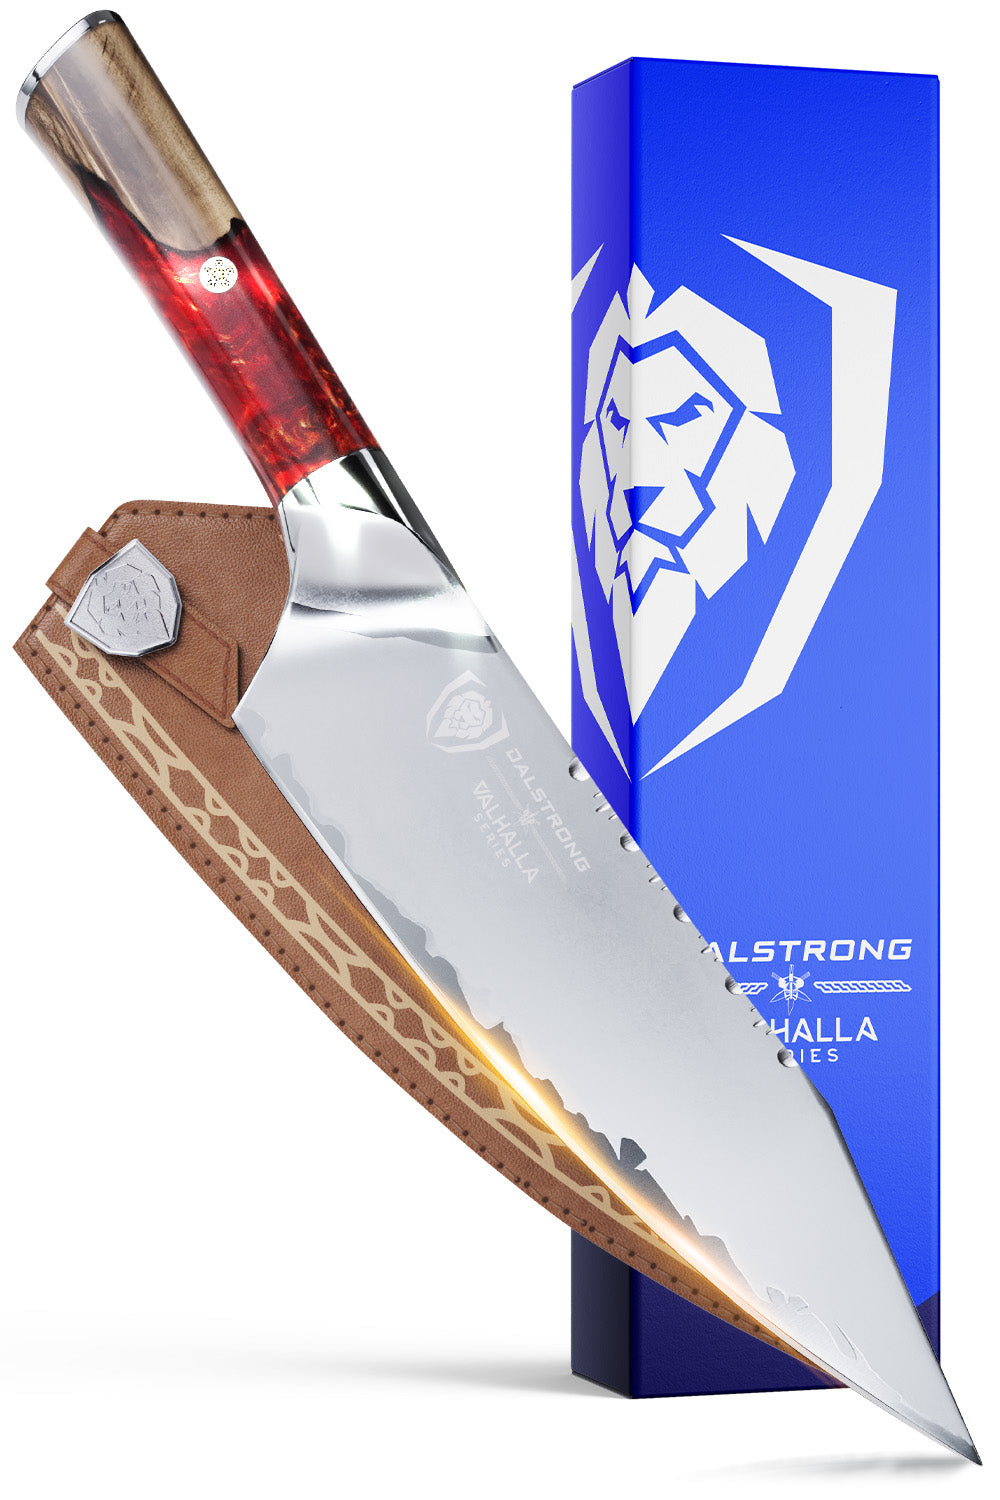 Chef's Knife 8" | Blood Raider Red Handle | Valhalla Series | Dalstrong ©